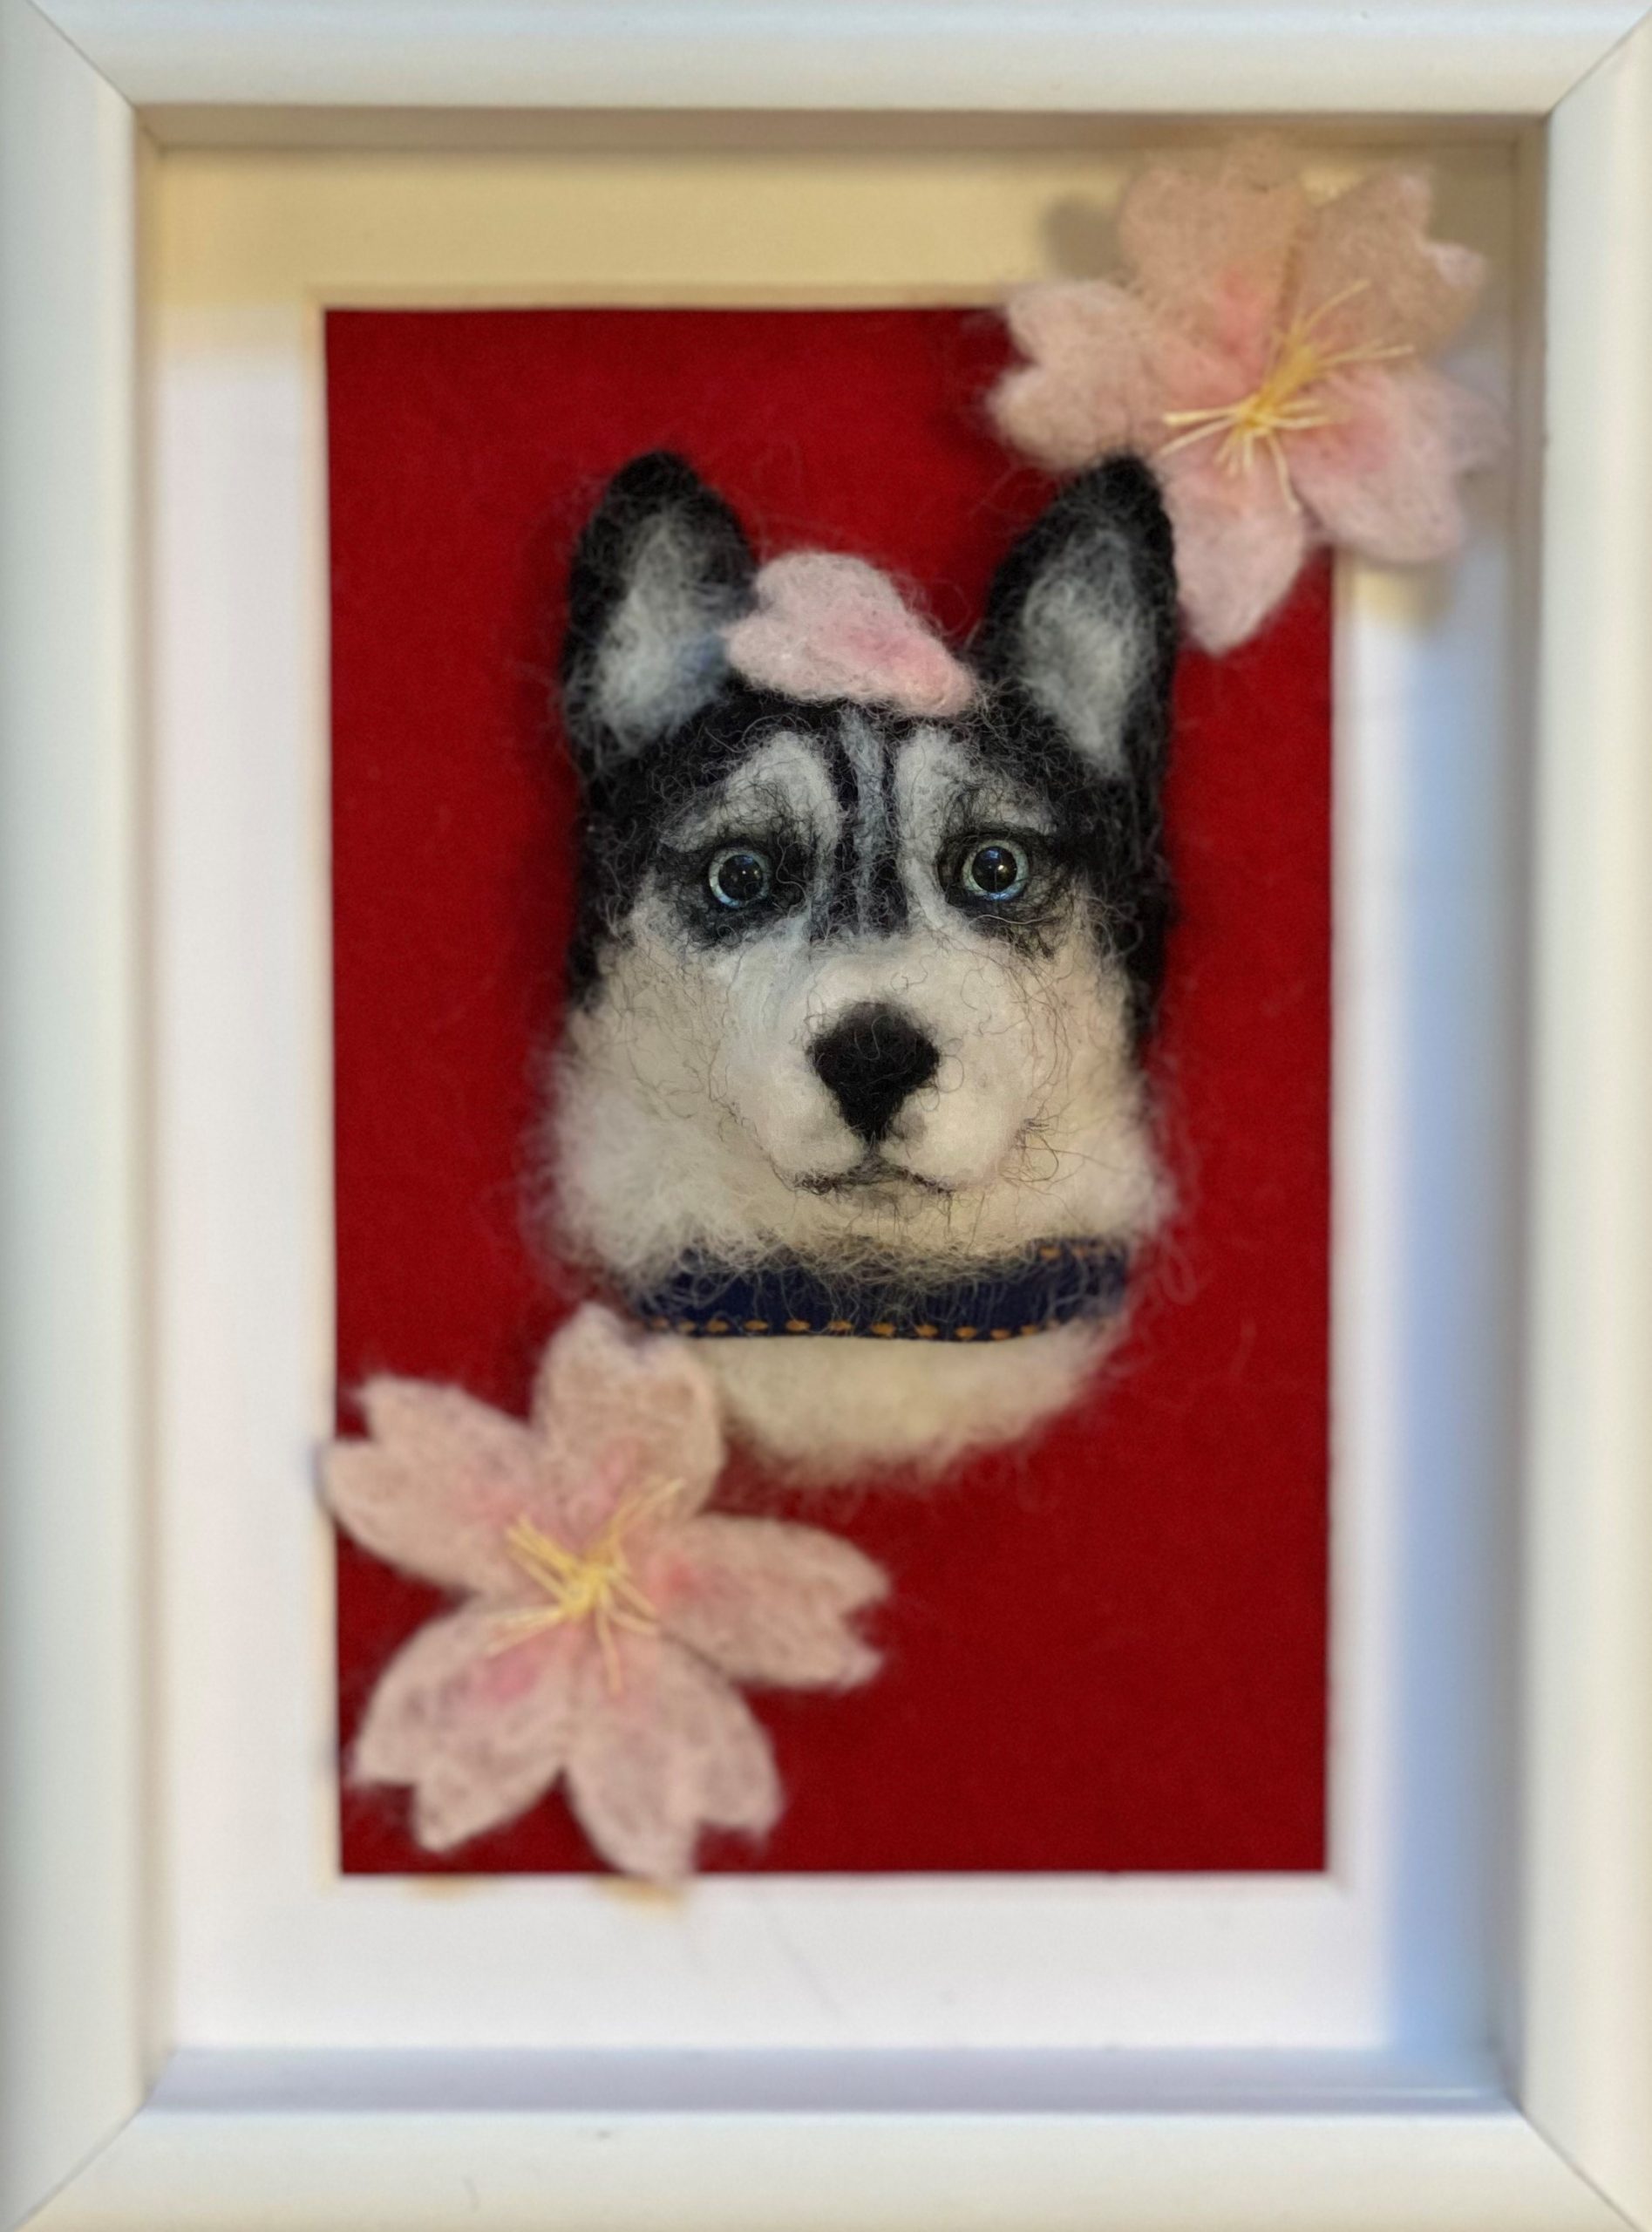 Framed, needle-felted portrait of a husky with 2 pink-and-white flowers in the corners and a flower petal on the huskey's head. The background of the portrait is red and the frame is white. The huskey has blue eyes.